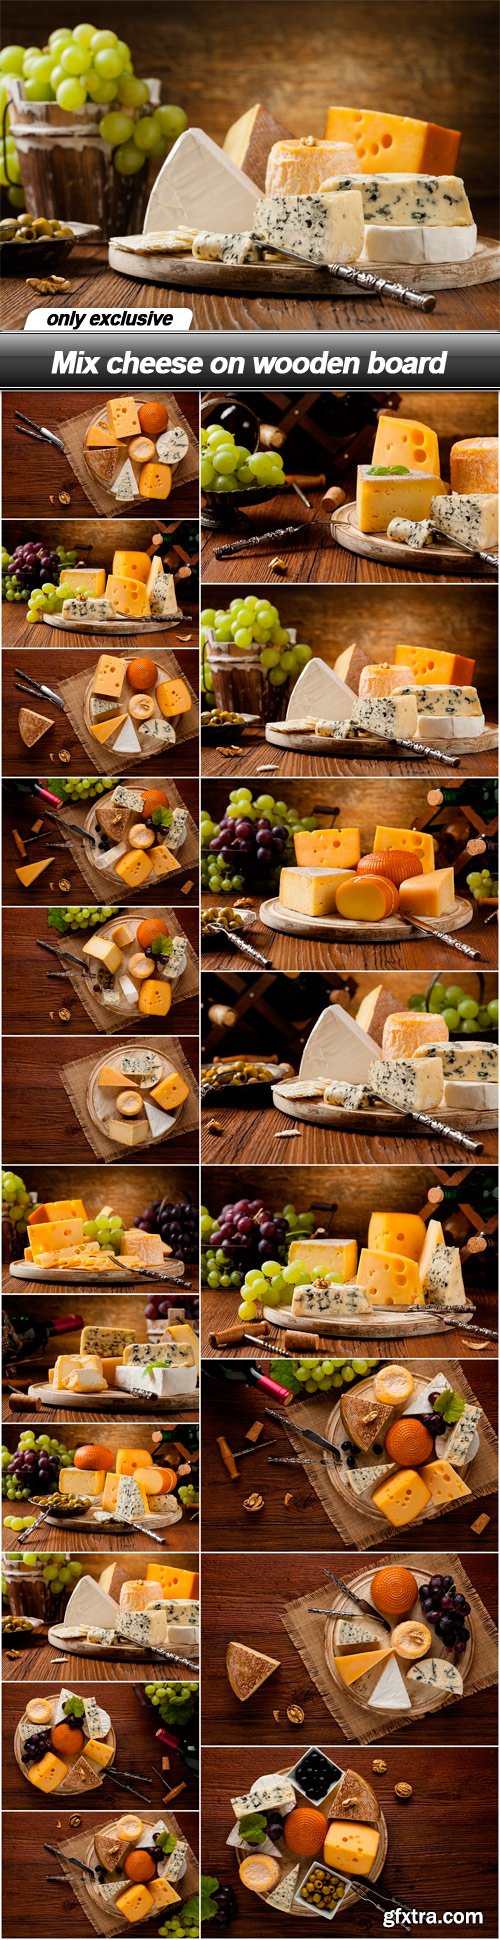 Mix cheese on wooden board - 20 UHQ JPEG